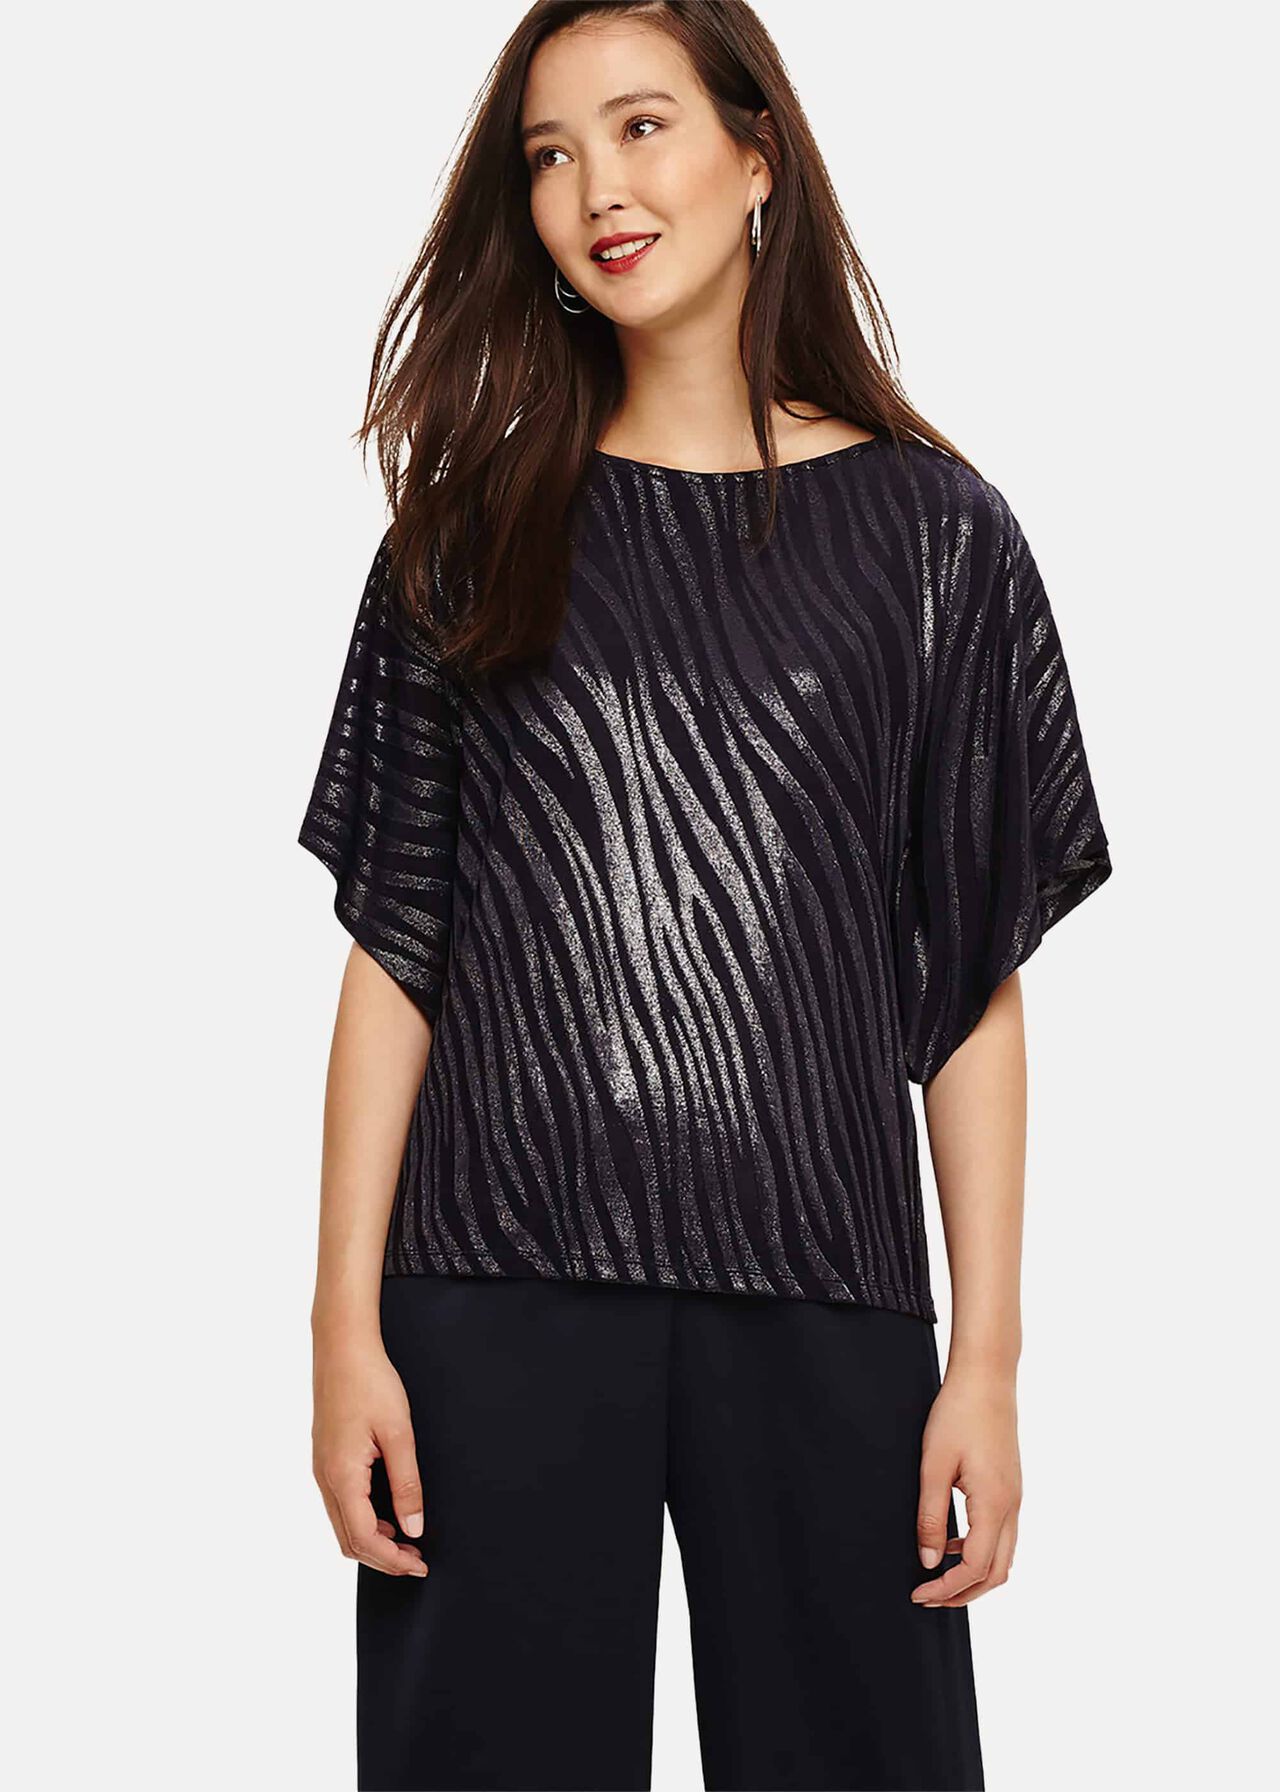 Salome Shimmer Top | Phase Eight